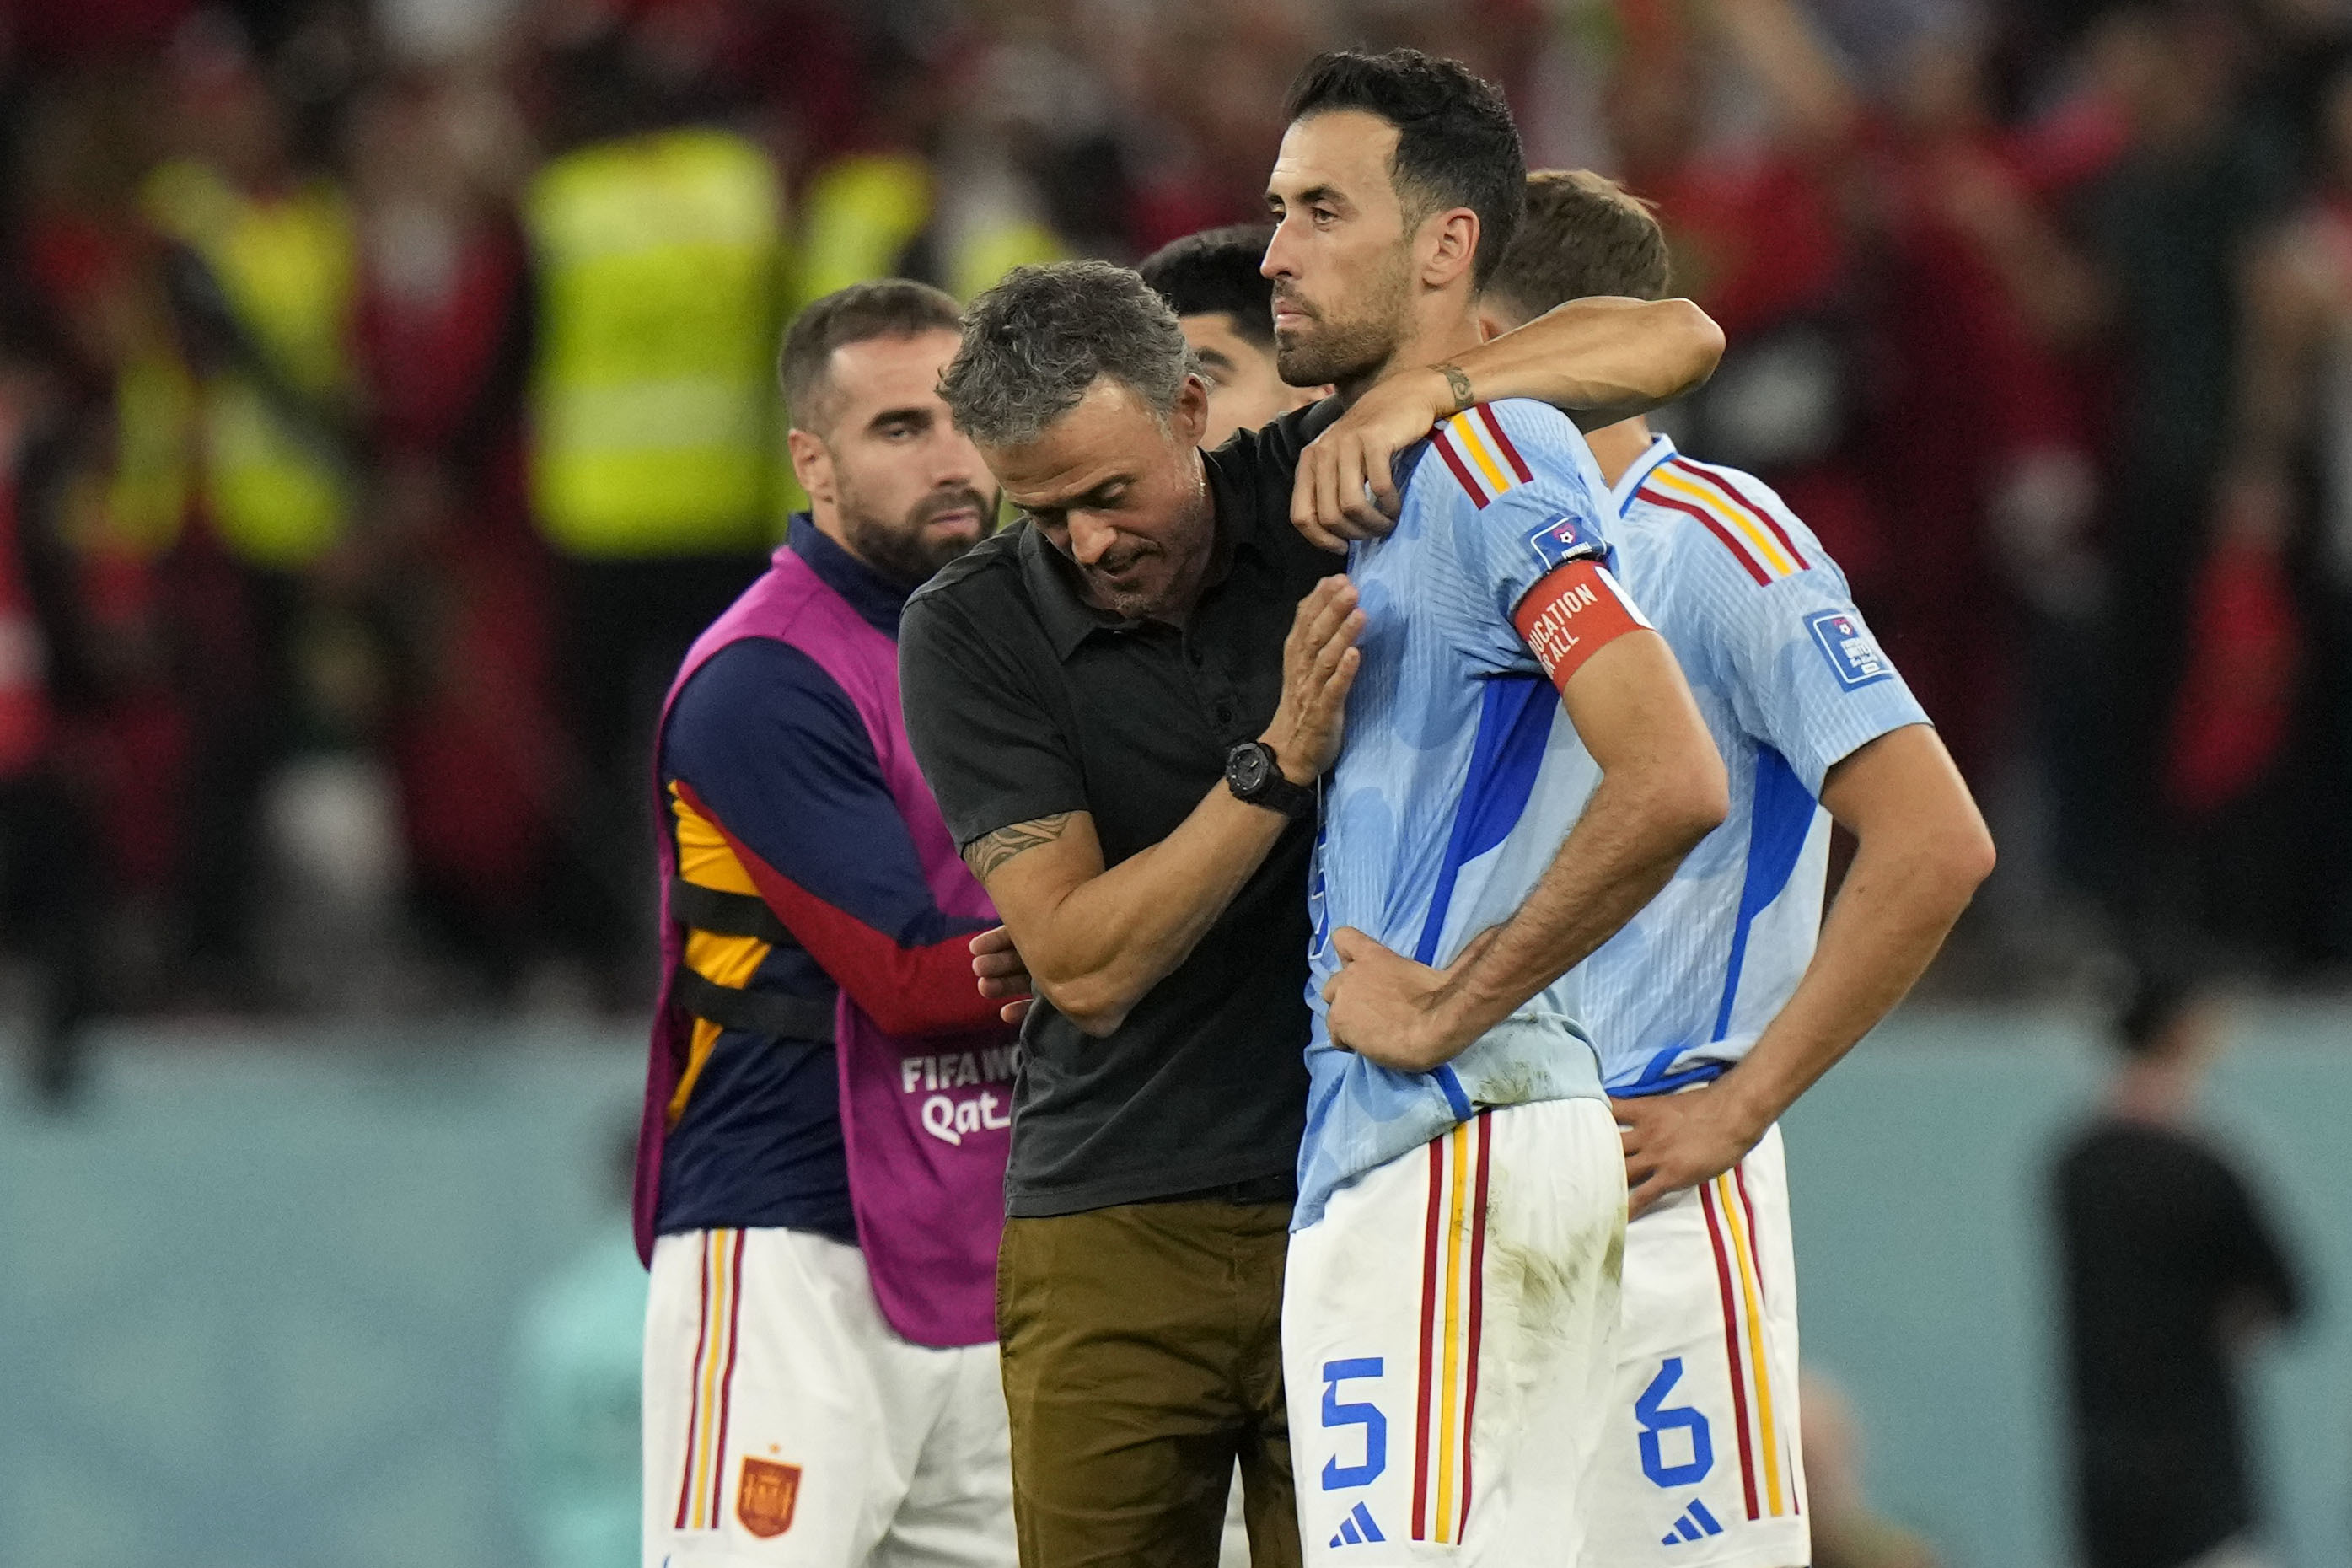 Spain's head coach Luis  lt;HIT gt;Enrique lt;/HIT gt;, left, embraces Sergio Busquets after the penalty shootout at the World Cup round of 16 soccer match between Morocco and Spain, at the Education City Stadium in Al Rayyan, Qatar, Tuesday, Dec. 6, 2022. (AP Photo/Luca Bruno)